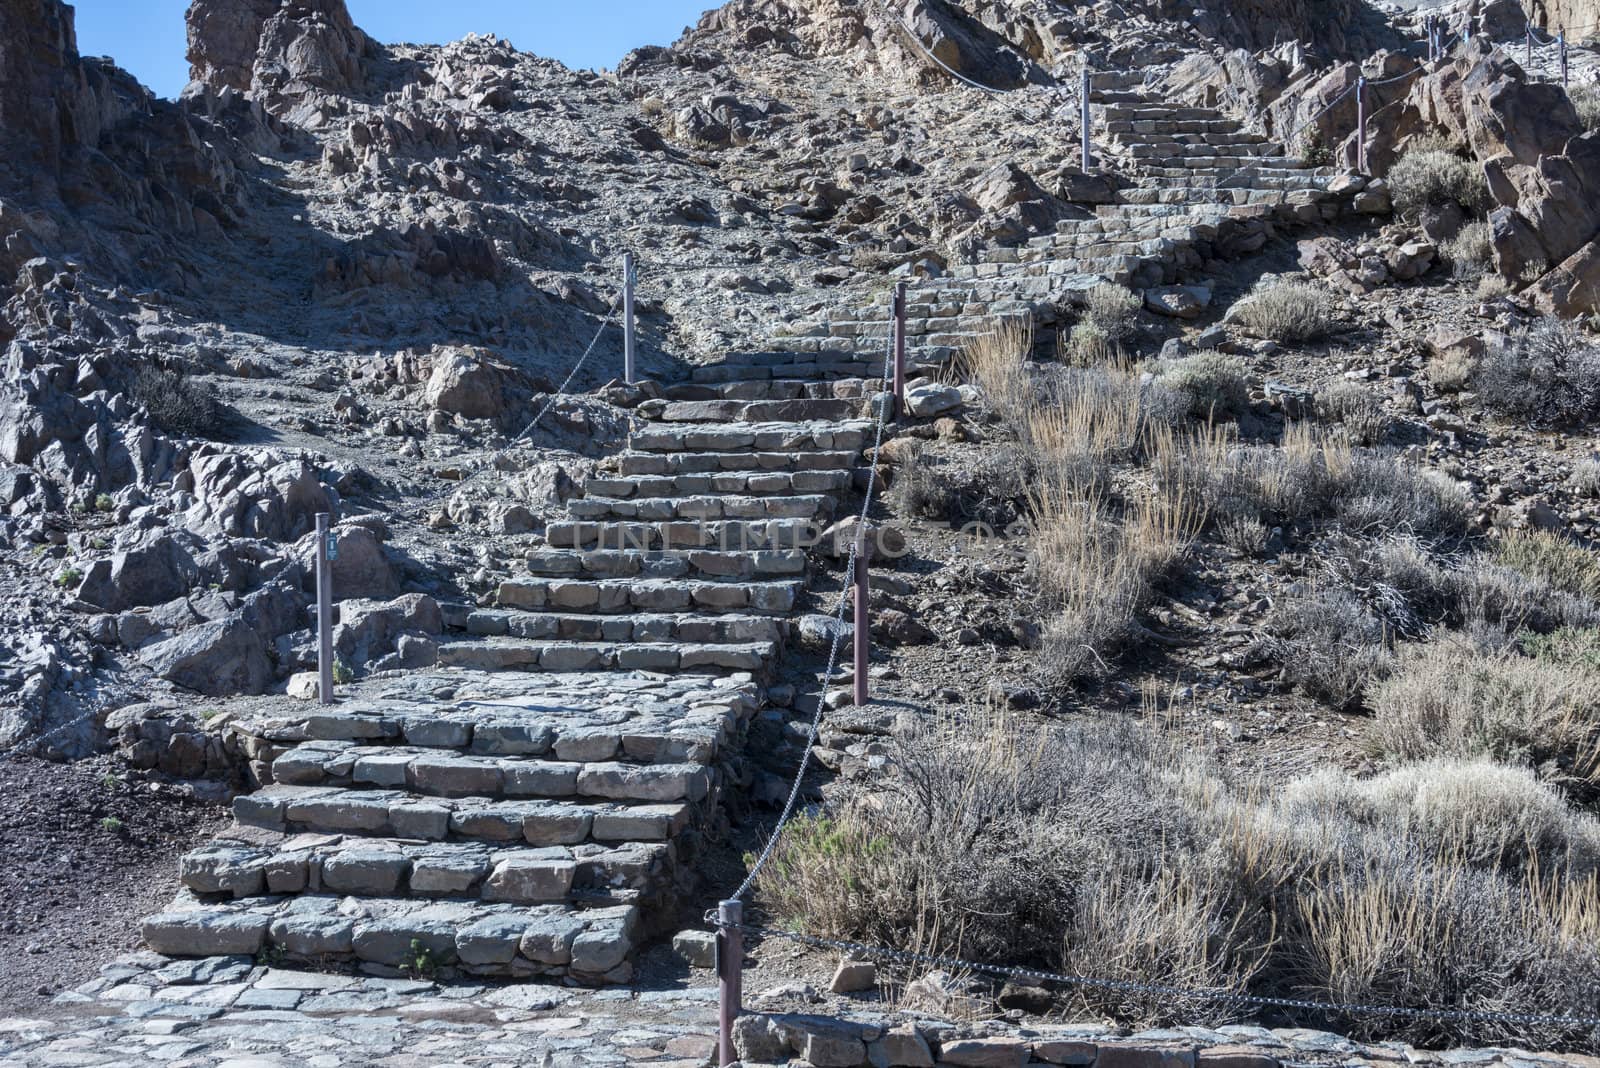 stairs from stones near the vulcano the teide on tenerife